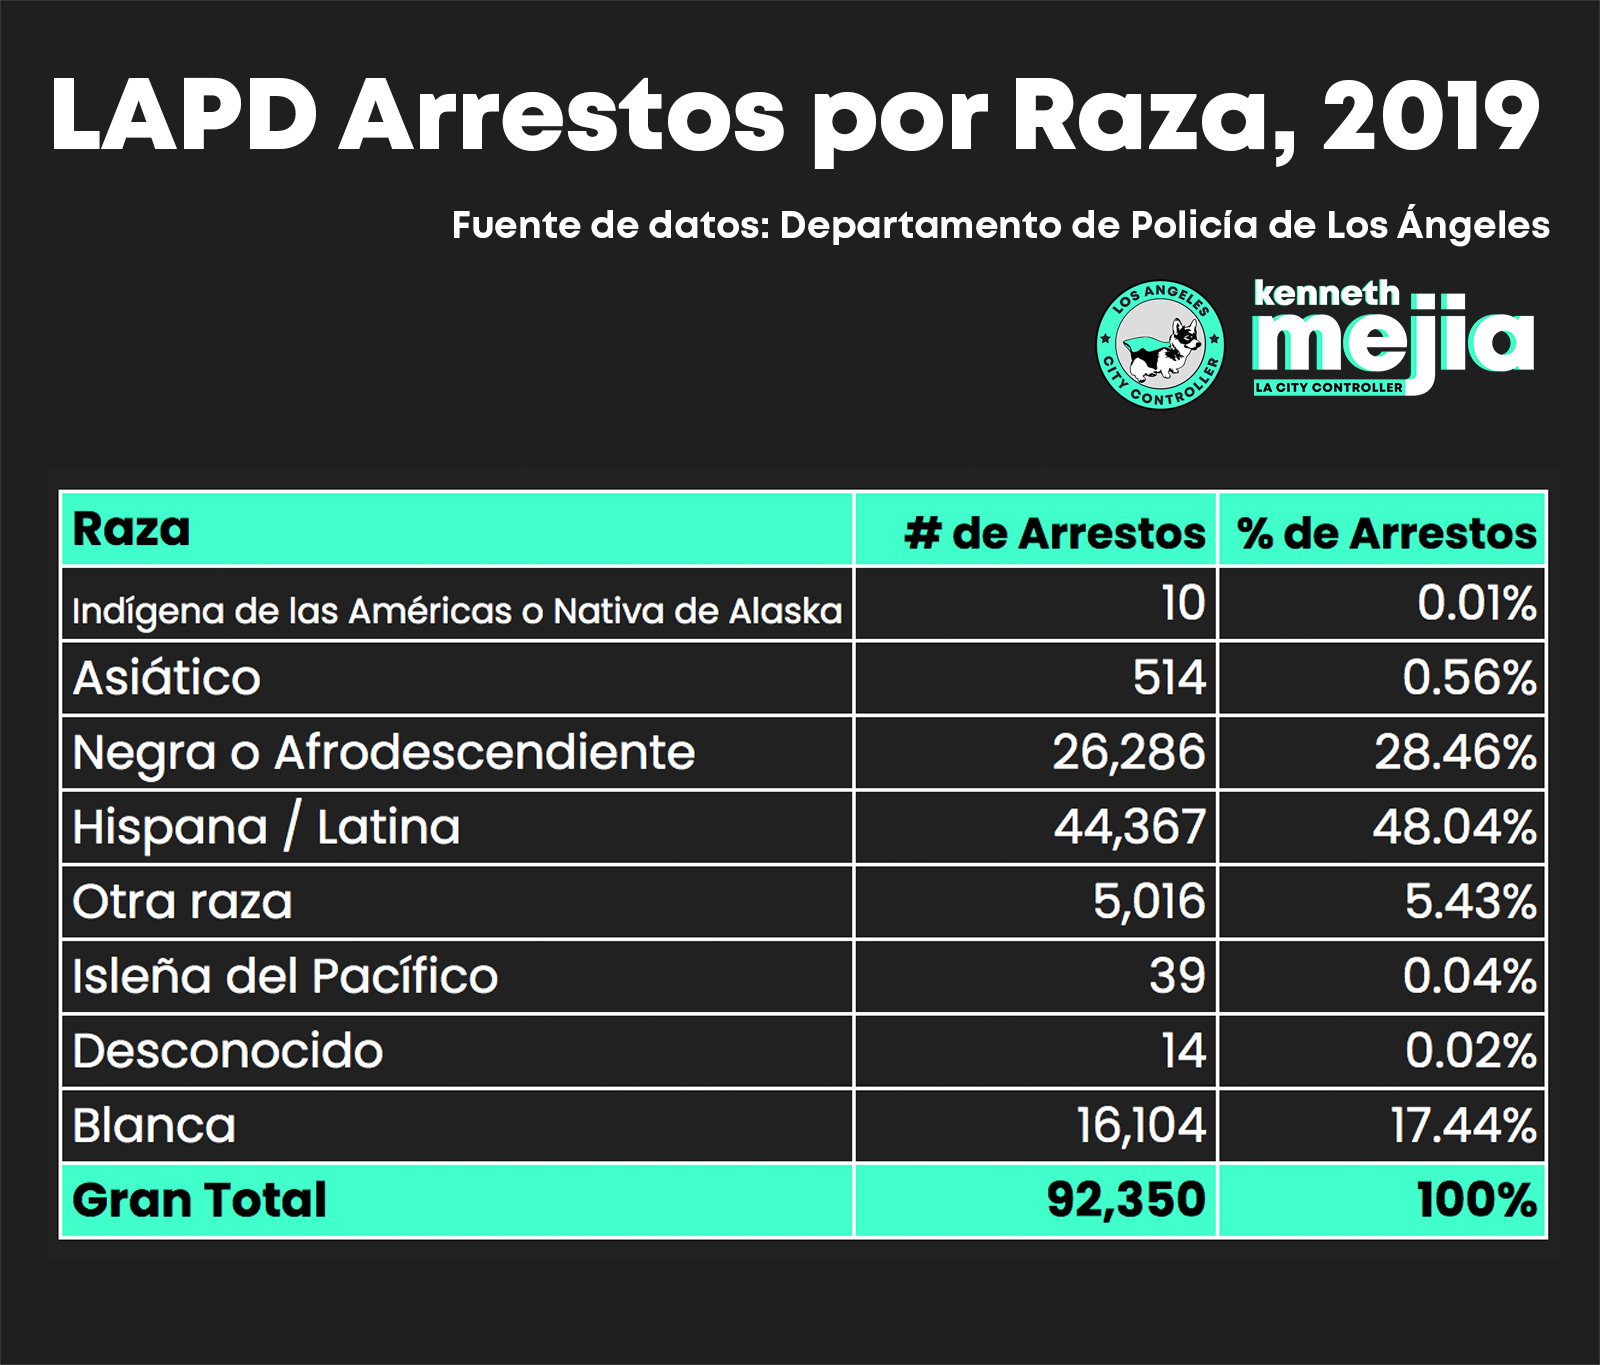 A bar chart of LAPD Arrests by Council District, 2019. There are 15 Council Districts. Council District 14 has a much higher number of arrests than any other district, with around 14,000 arrests. There are several other Council Districts with around 7,000 to 9,000 arrests (CDs 1, 6, 8, 9, 13), The rest of the Council Districts have fewer than around 5,000 to 6,000 arrests. CDs 5 and 12 in particular have the fewest number of arrests, at around 2,500 arrests each. Source of data is LAPD.